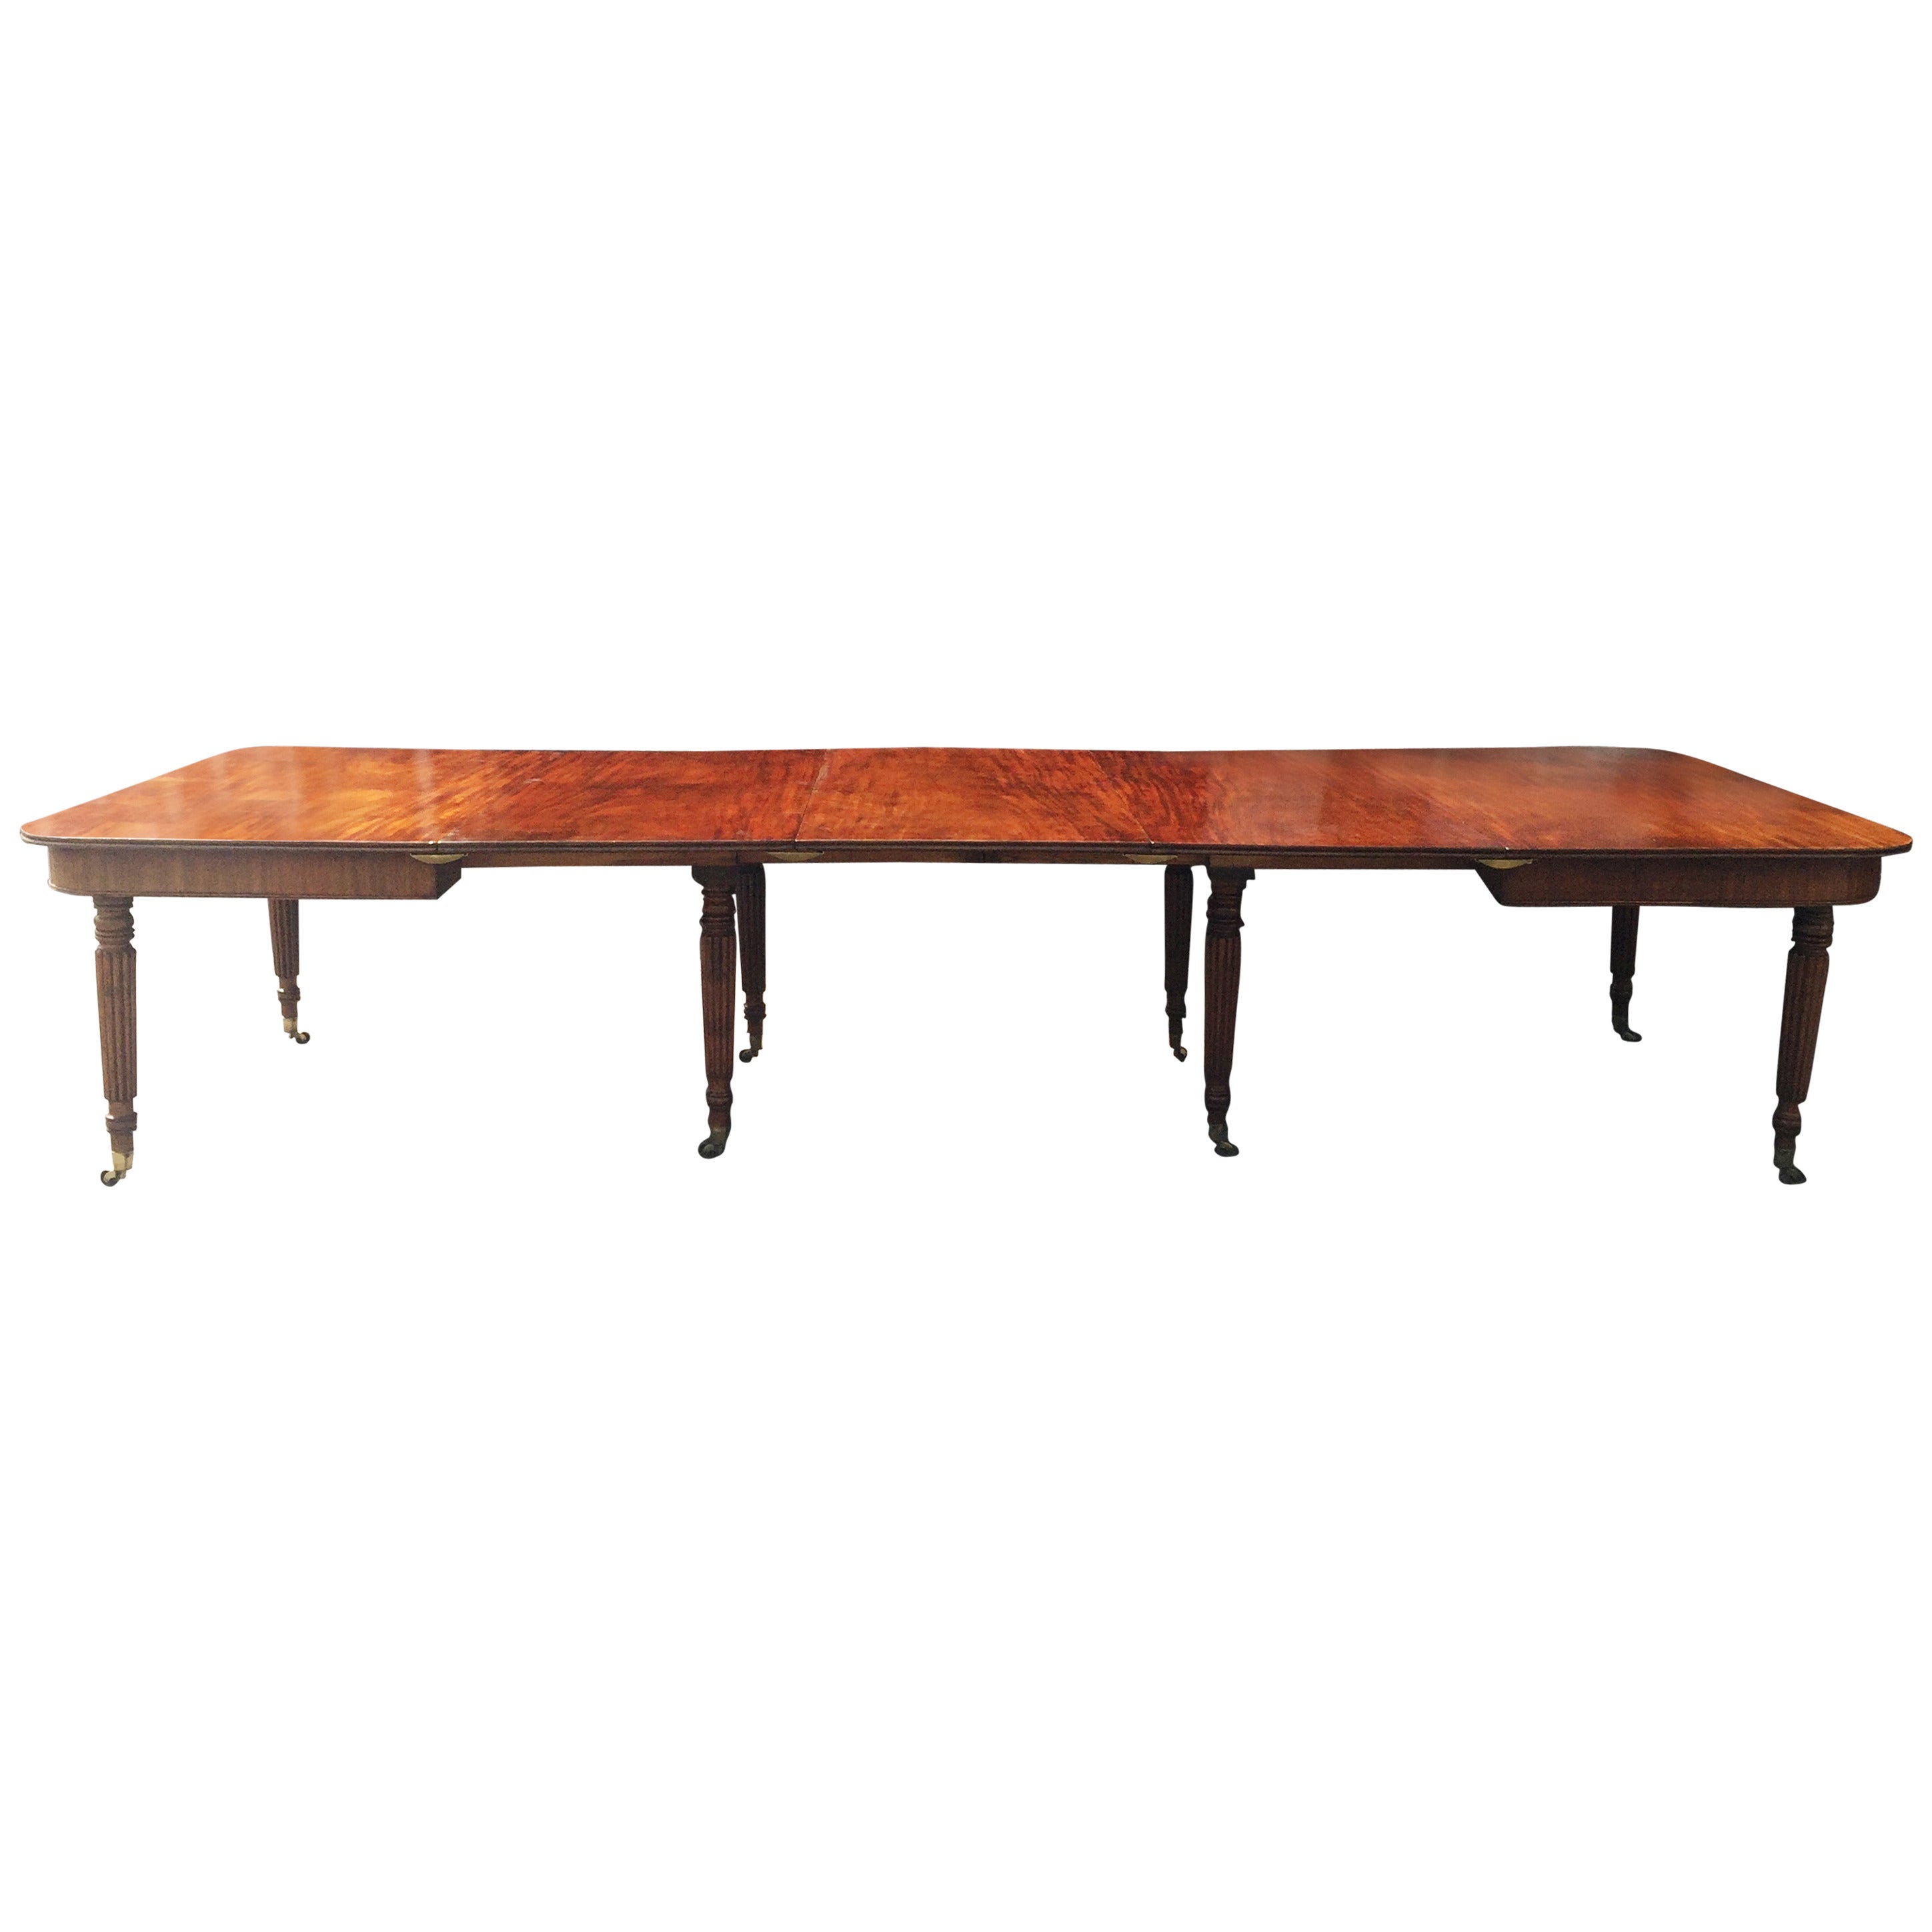 Gillows Influenced Regency Extending Dining Table